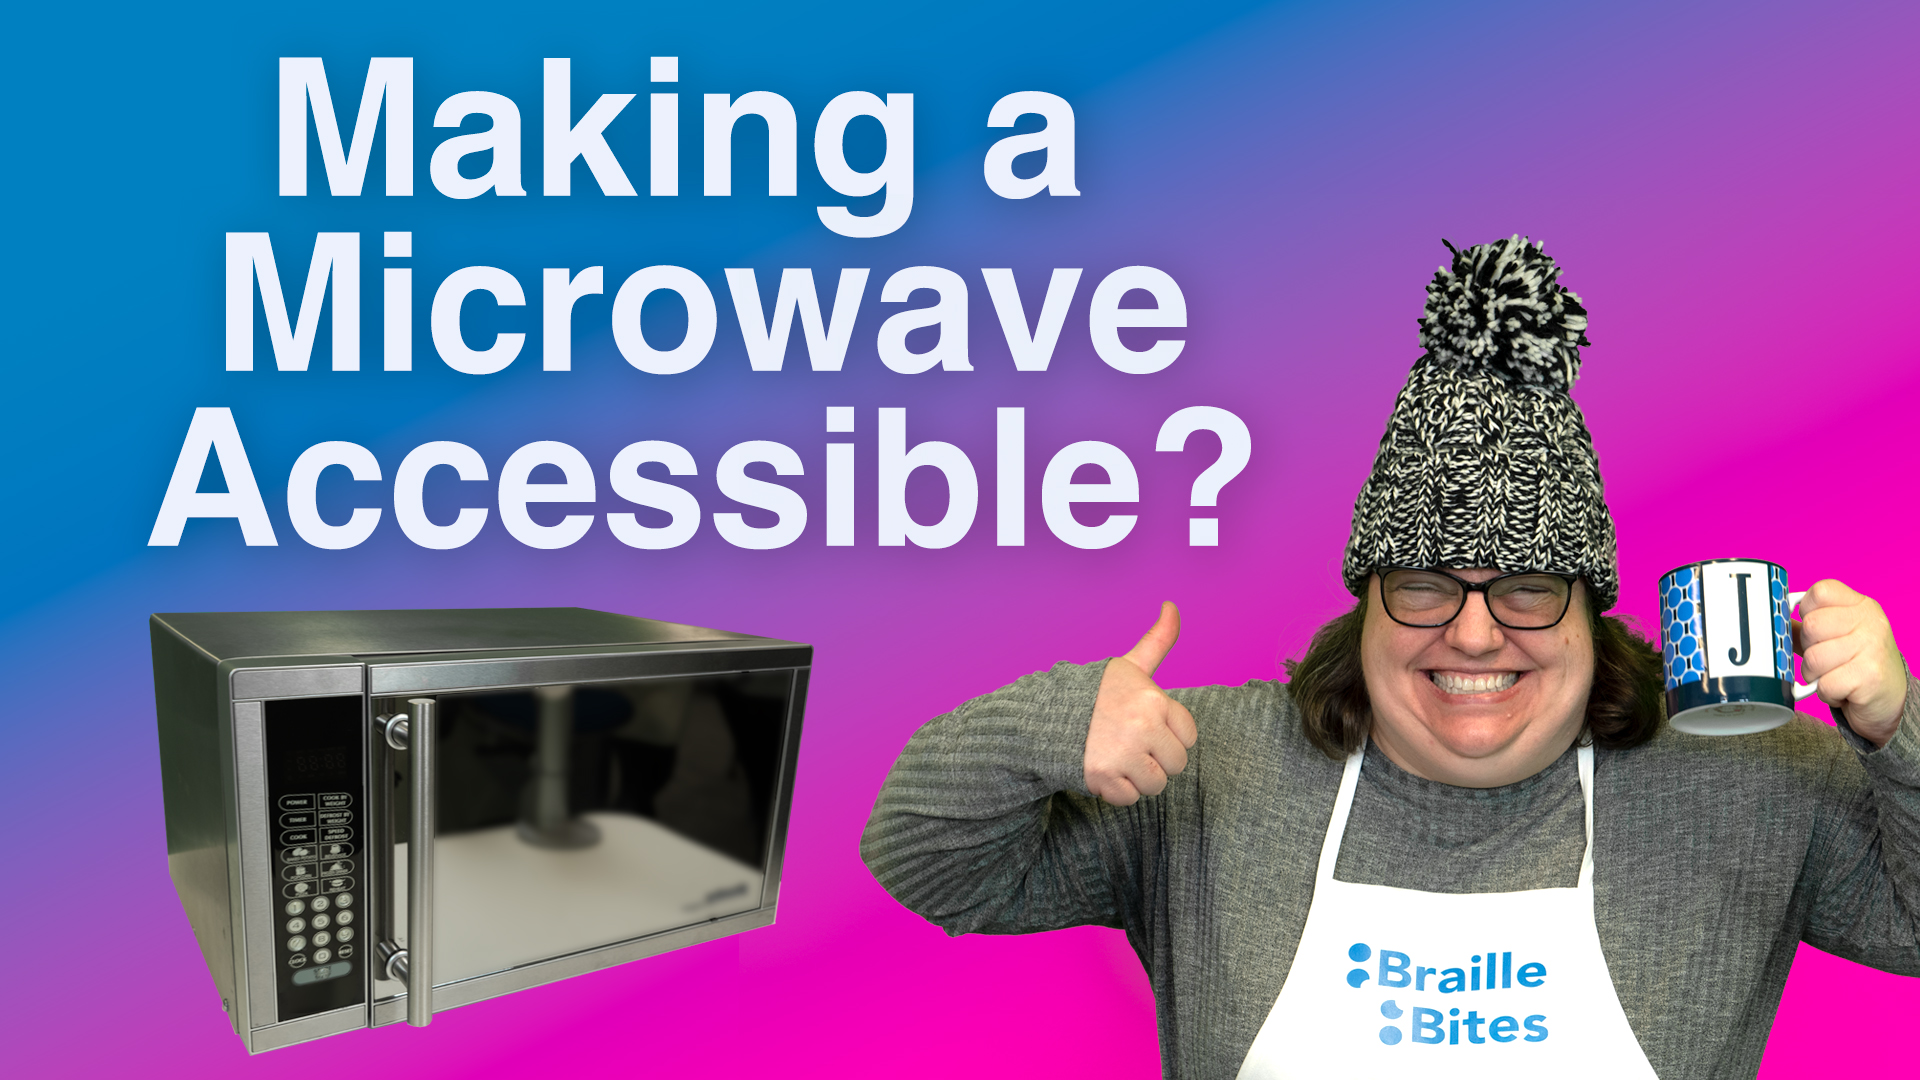 Video thumbnails shows Jen wearing a black and white toque and a white apron with the Braille Bites logo. She is holding a coffee mug in one hand and giving a thumbs up with the other hand. A microwave superimposed next to her. Title reads: Making a Microwave Accessible?